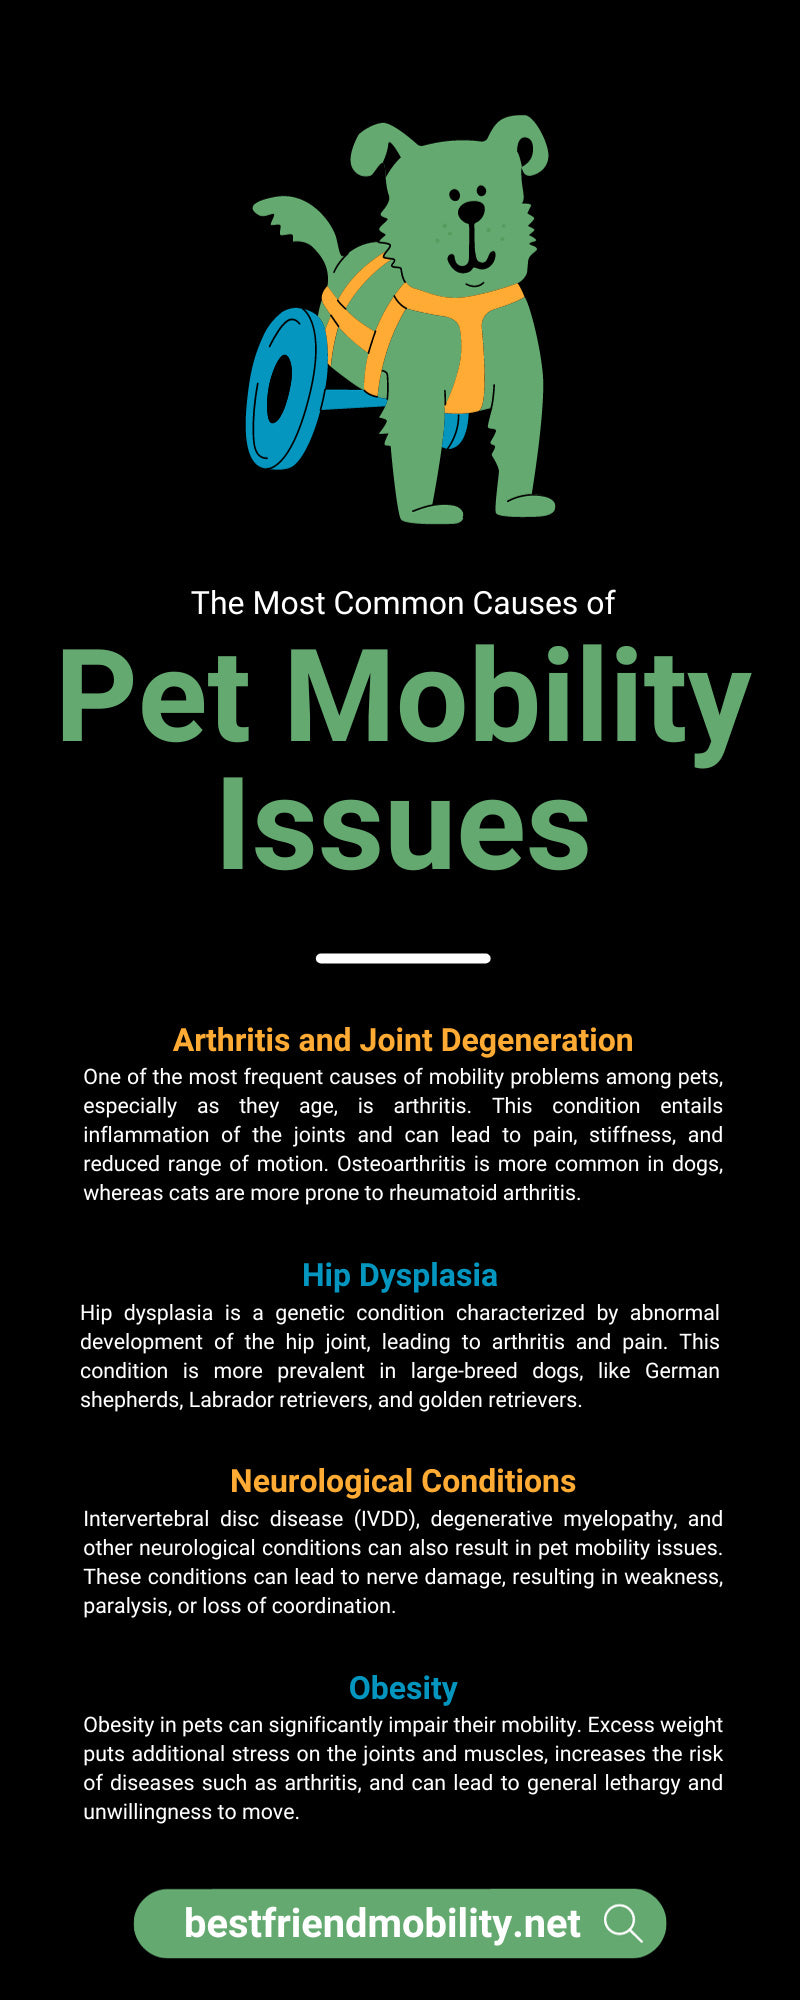 The Most Common Causes of Pet Mobility Issues